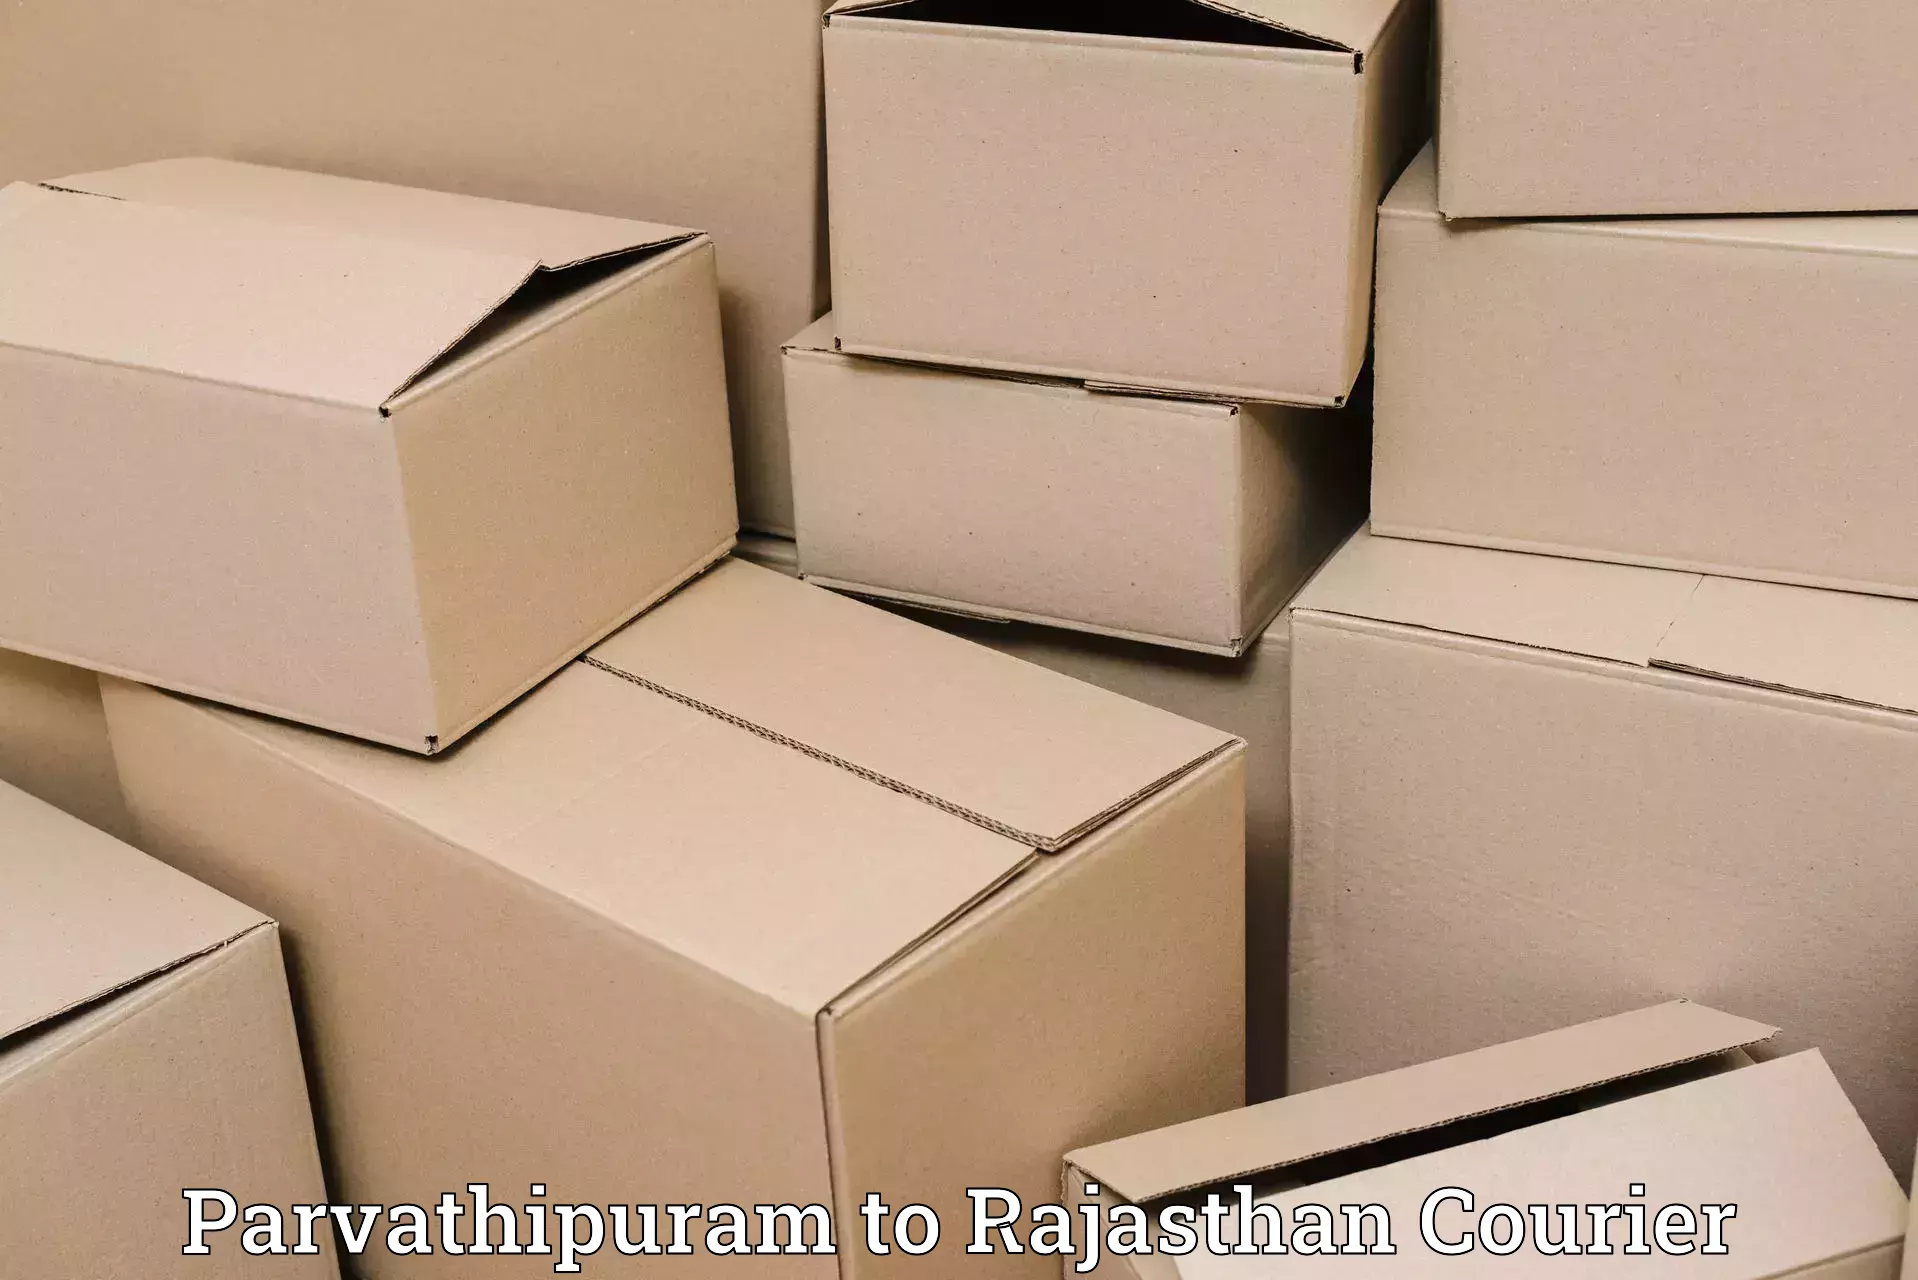 Sustainable shipping practices Parvathipuram to Nagar